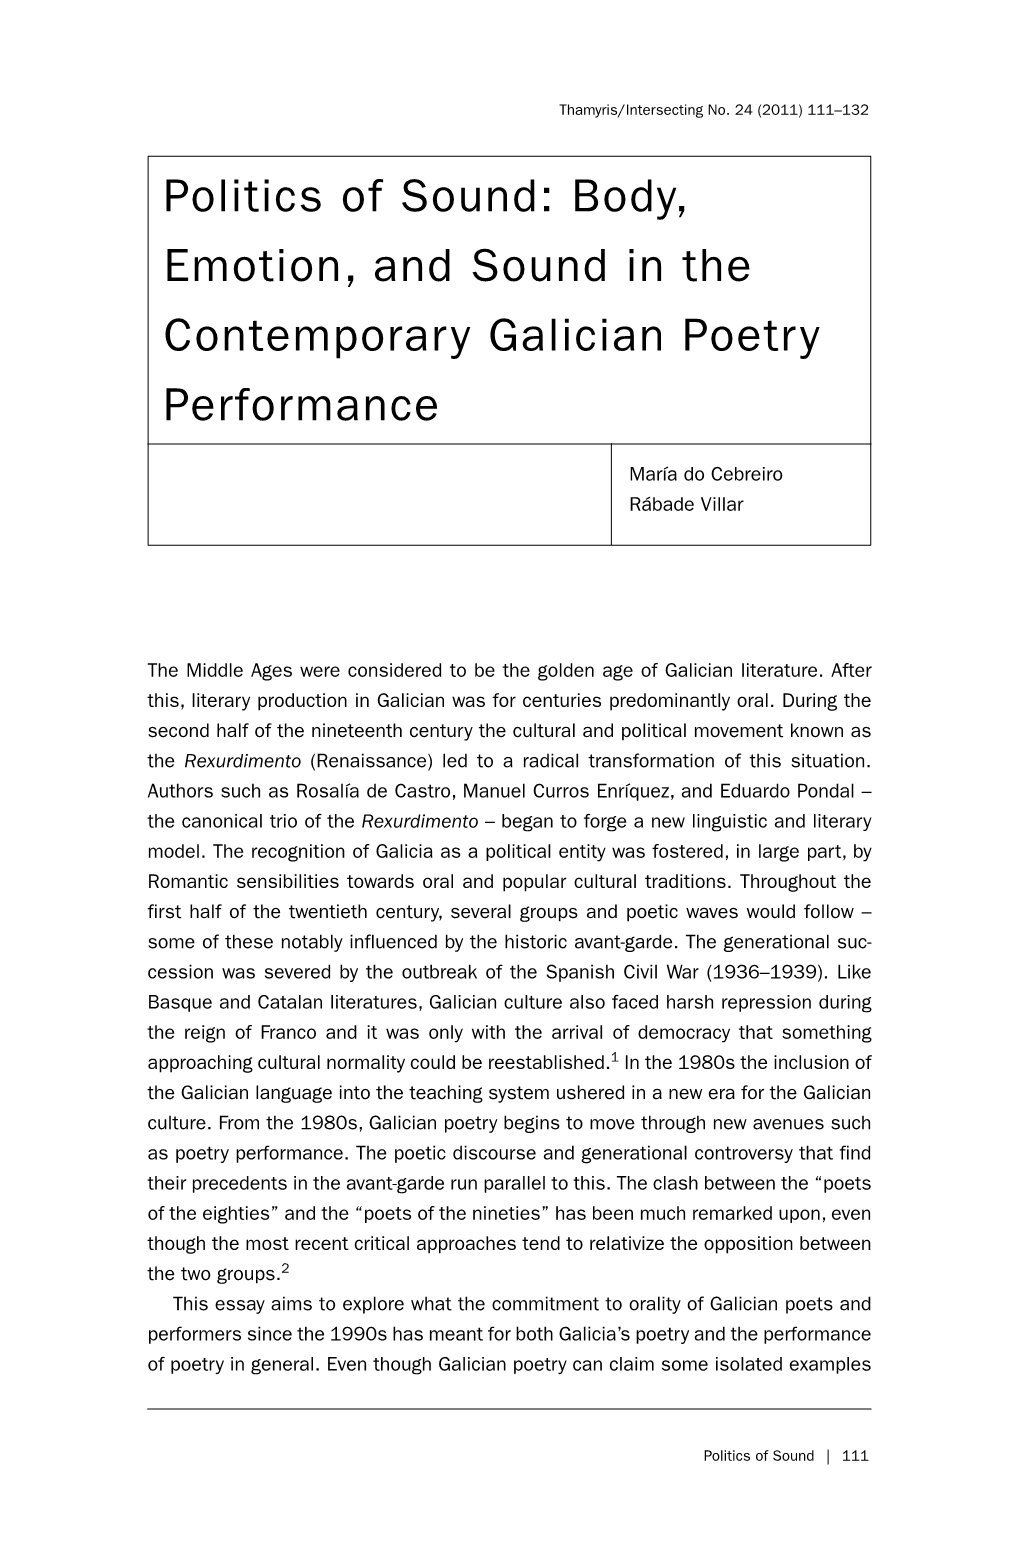 Body, Emotion, and Sound in the Contemporary Galician Poetry Performance